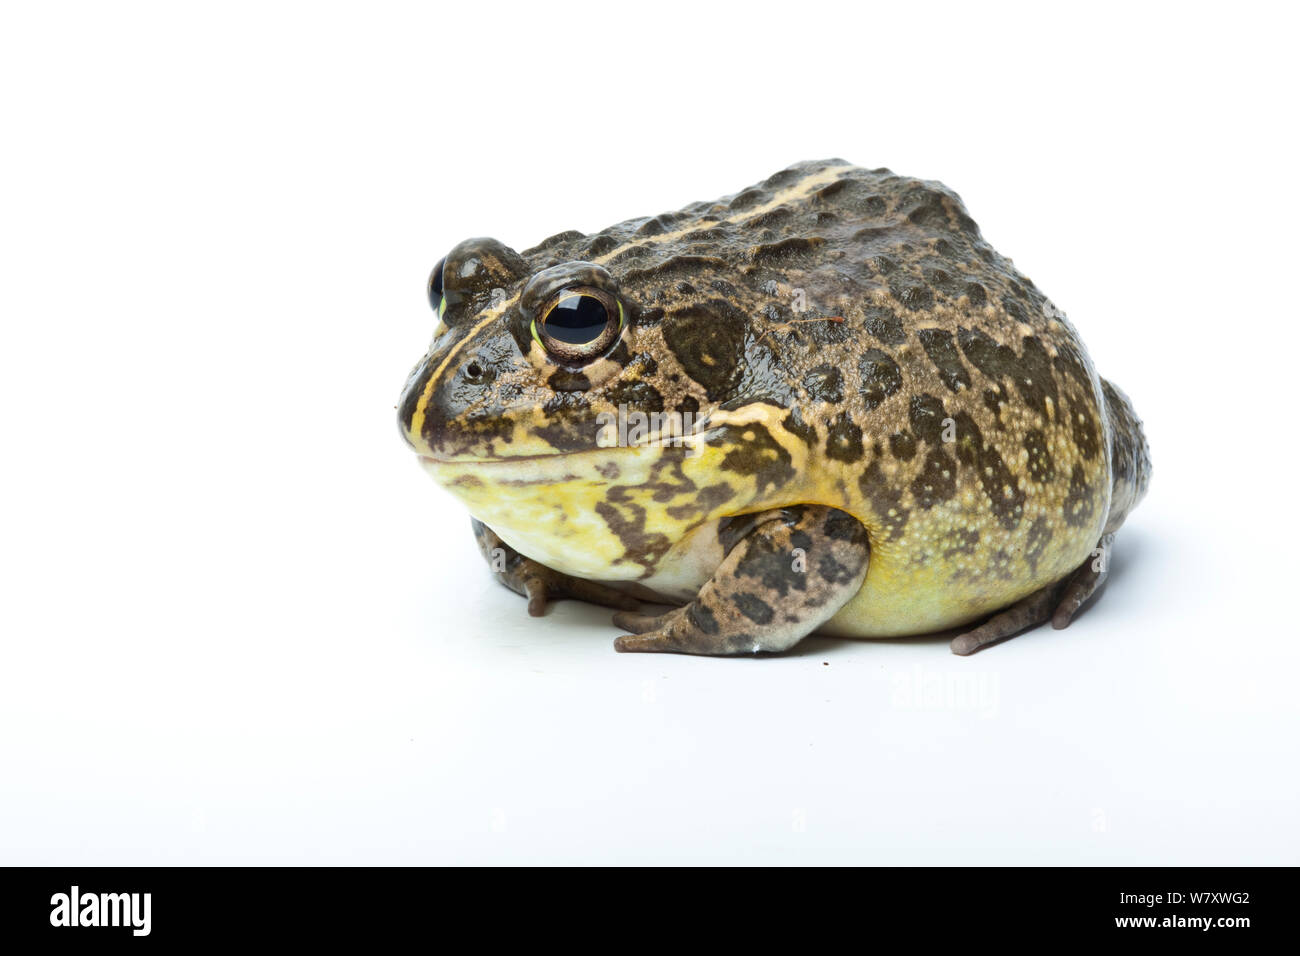 South African Dwarf Bullfrog (Pyxicephalus edulis) on white background, captive occurs in Southern Africa. Stock Photo